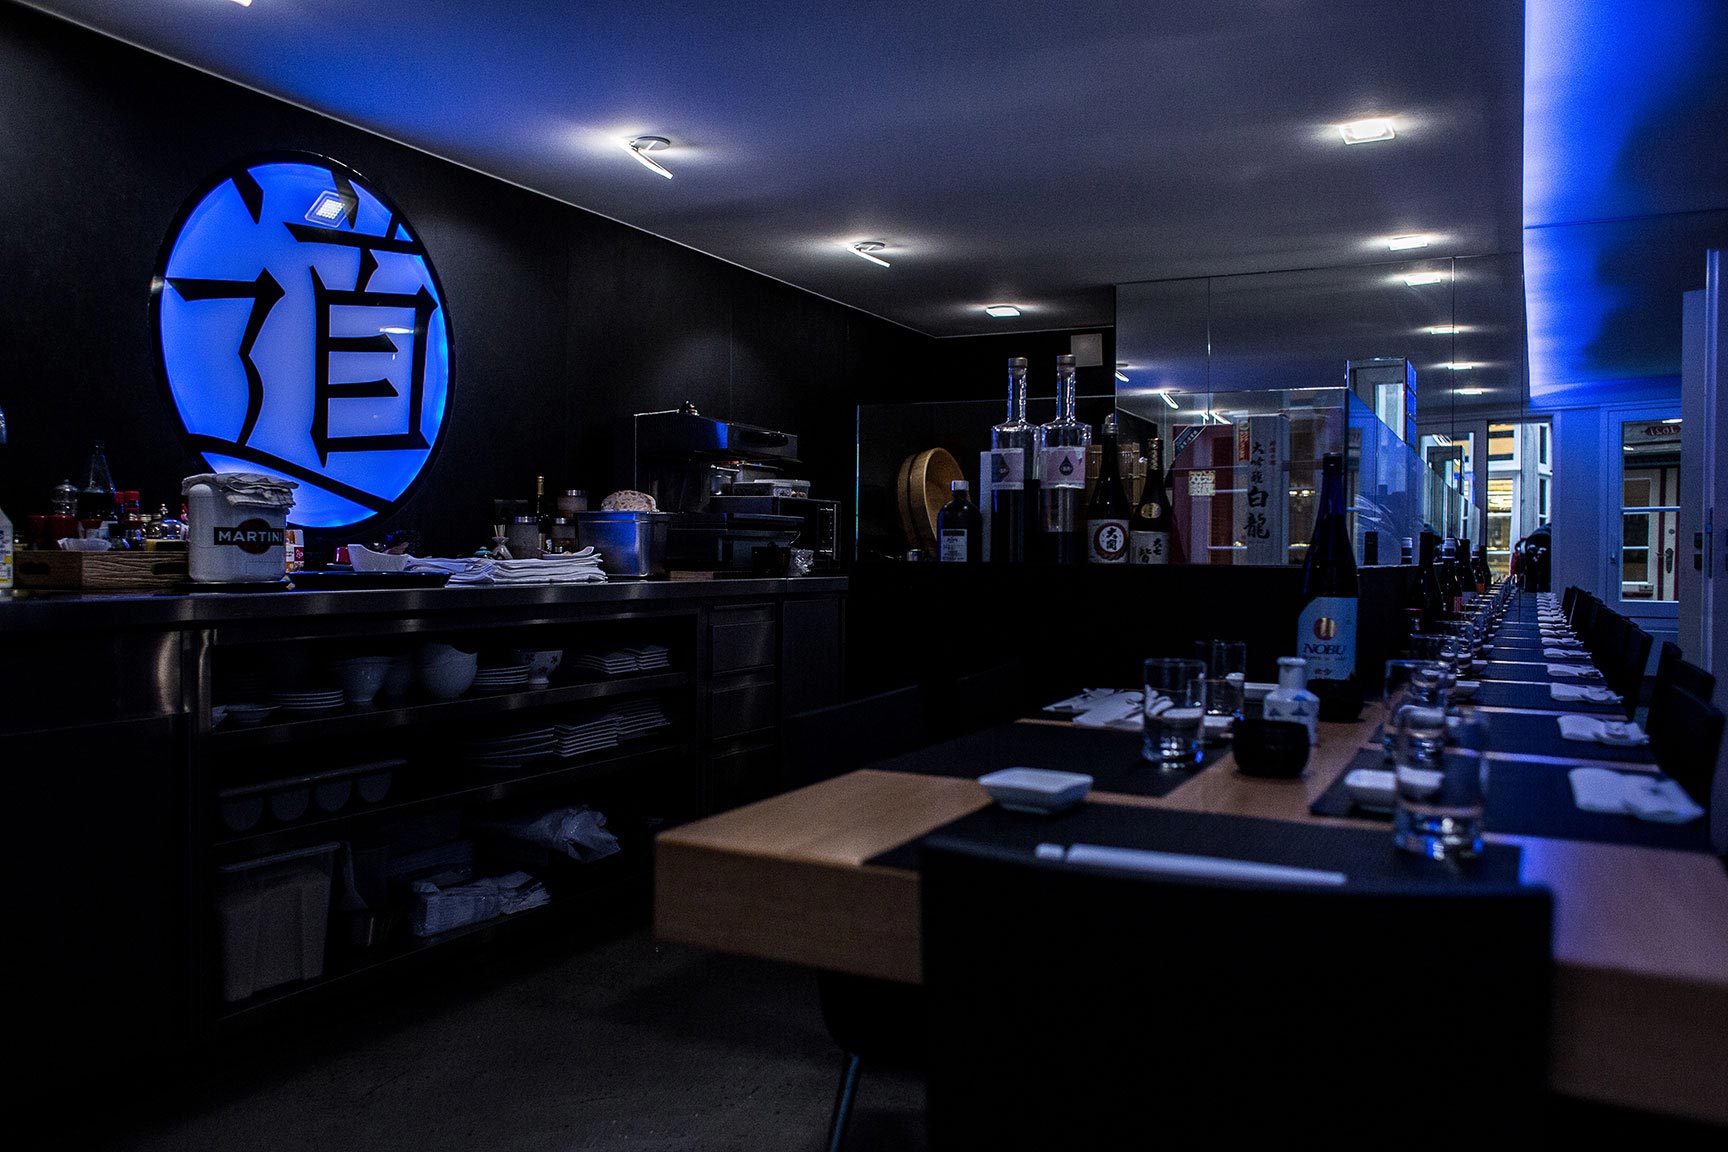 A dark bar with blue colours and Asian symbols